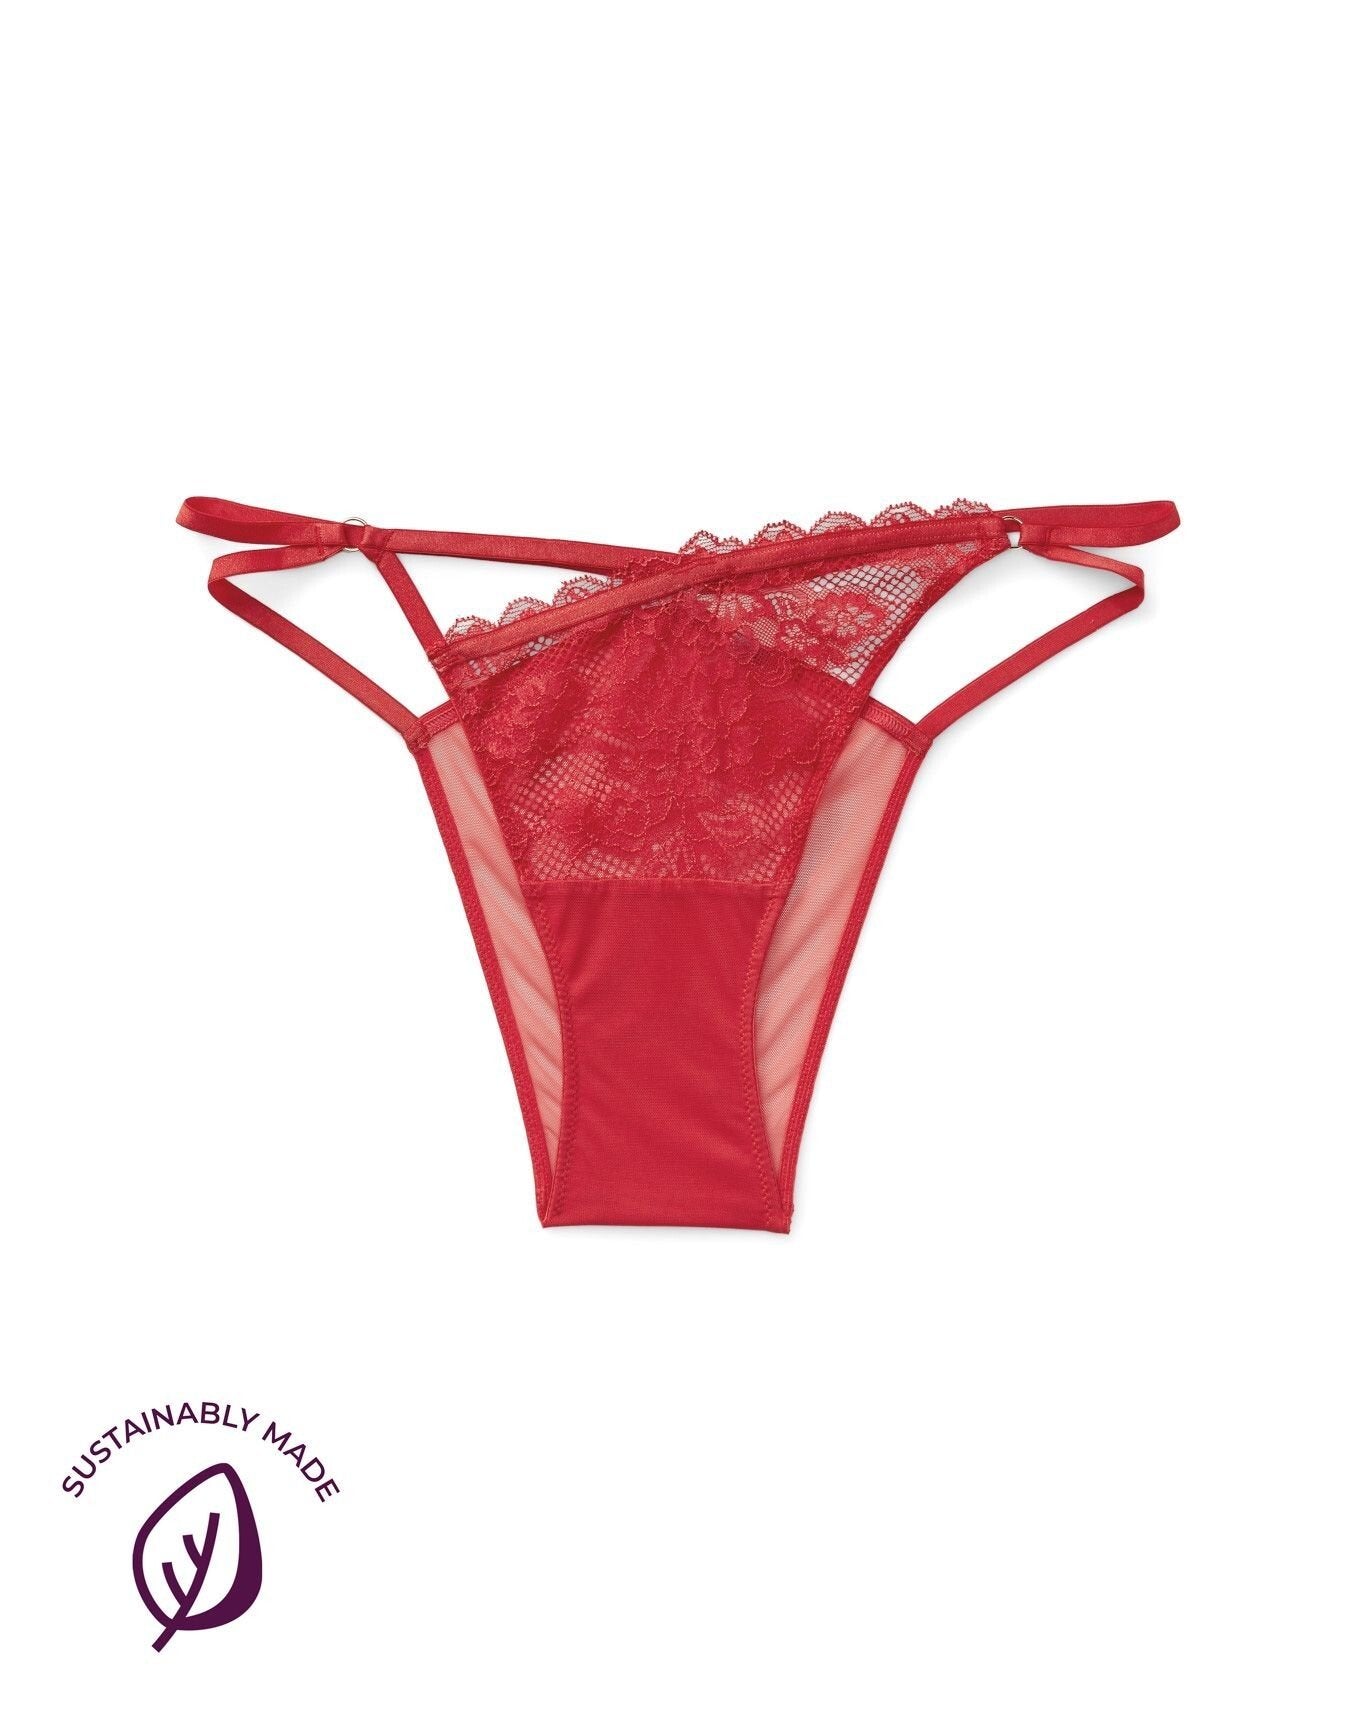 Adore Me Vianna Brazilian Cheeky in color Poinsettia and shape cheeky